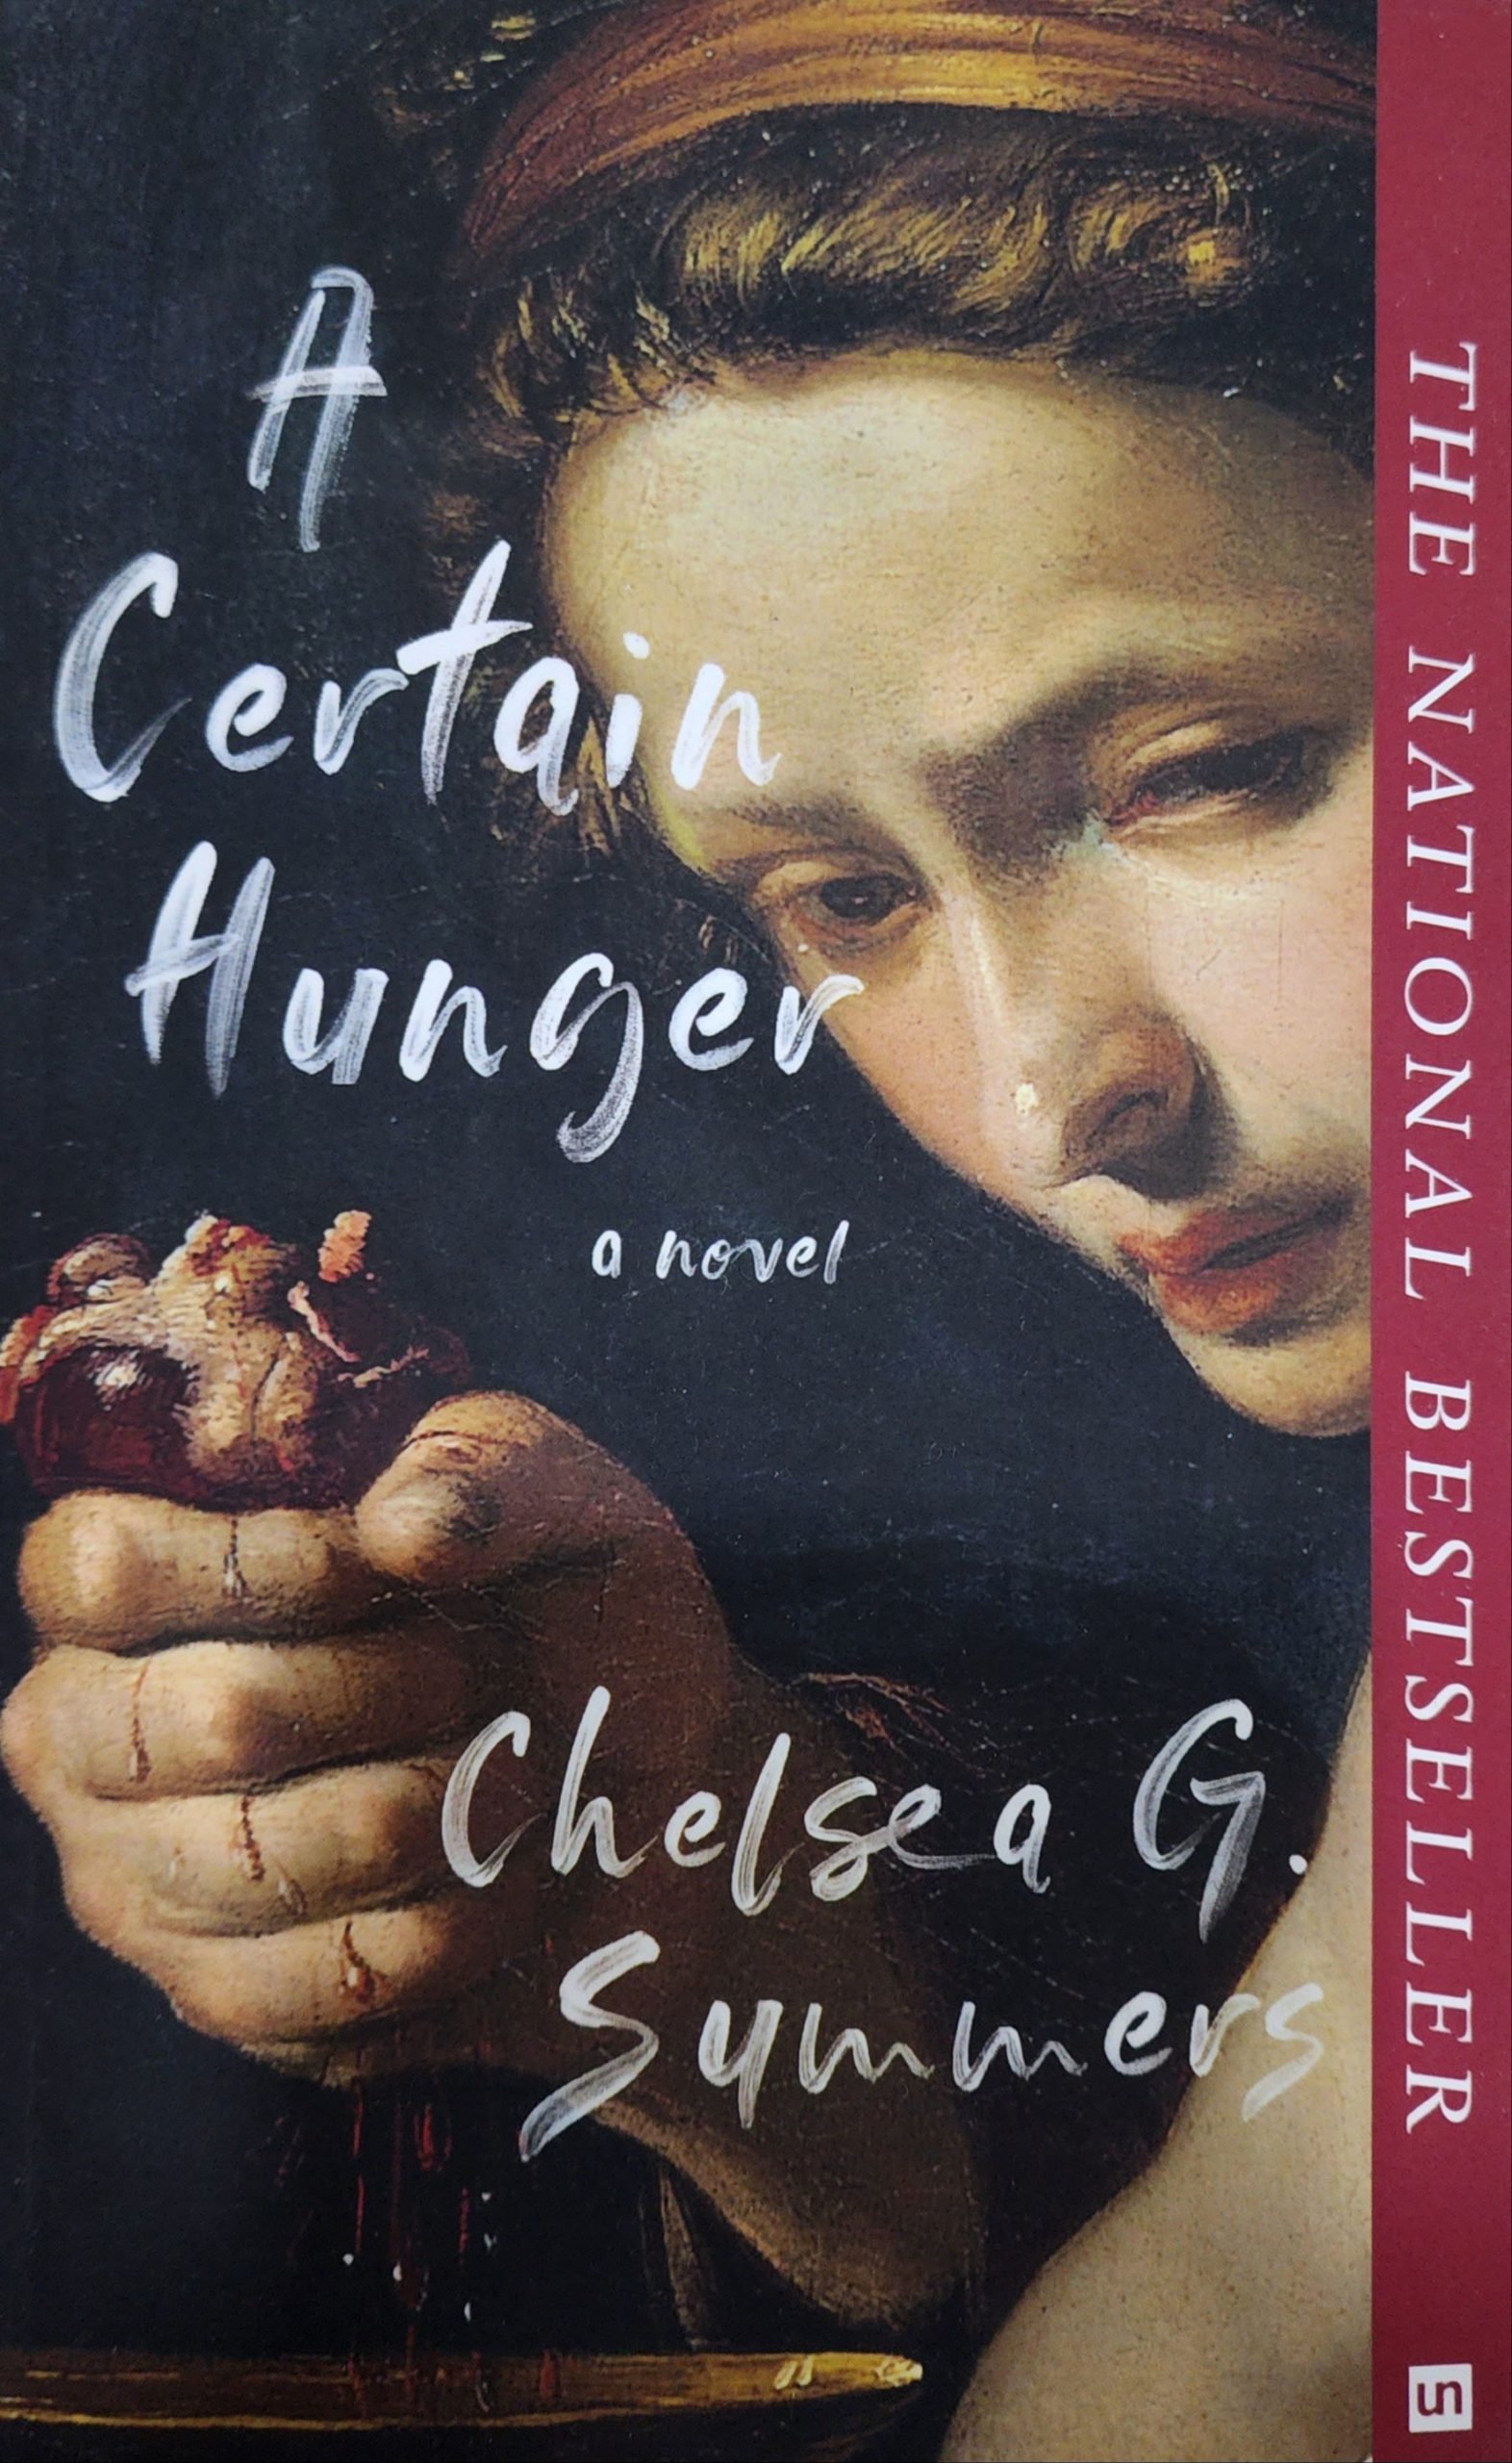 A certain hunger by CHELSEA G. SUMMERS